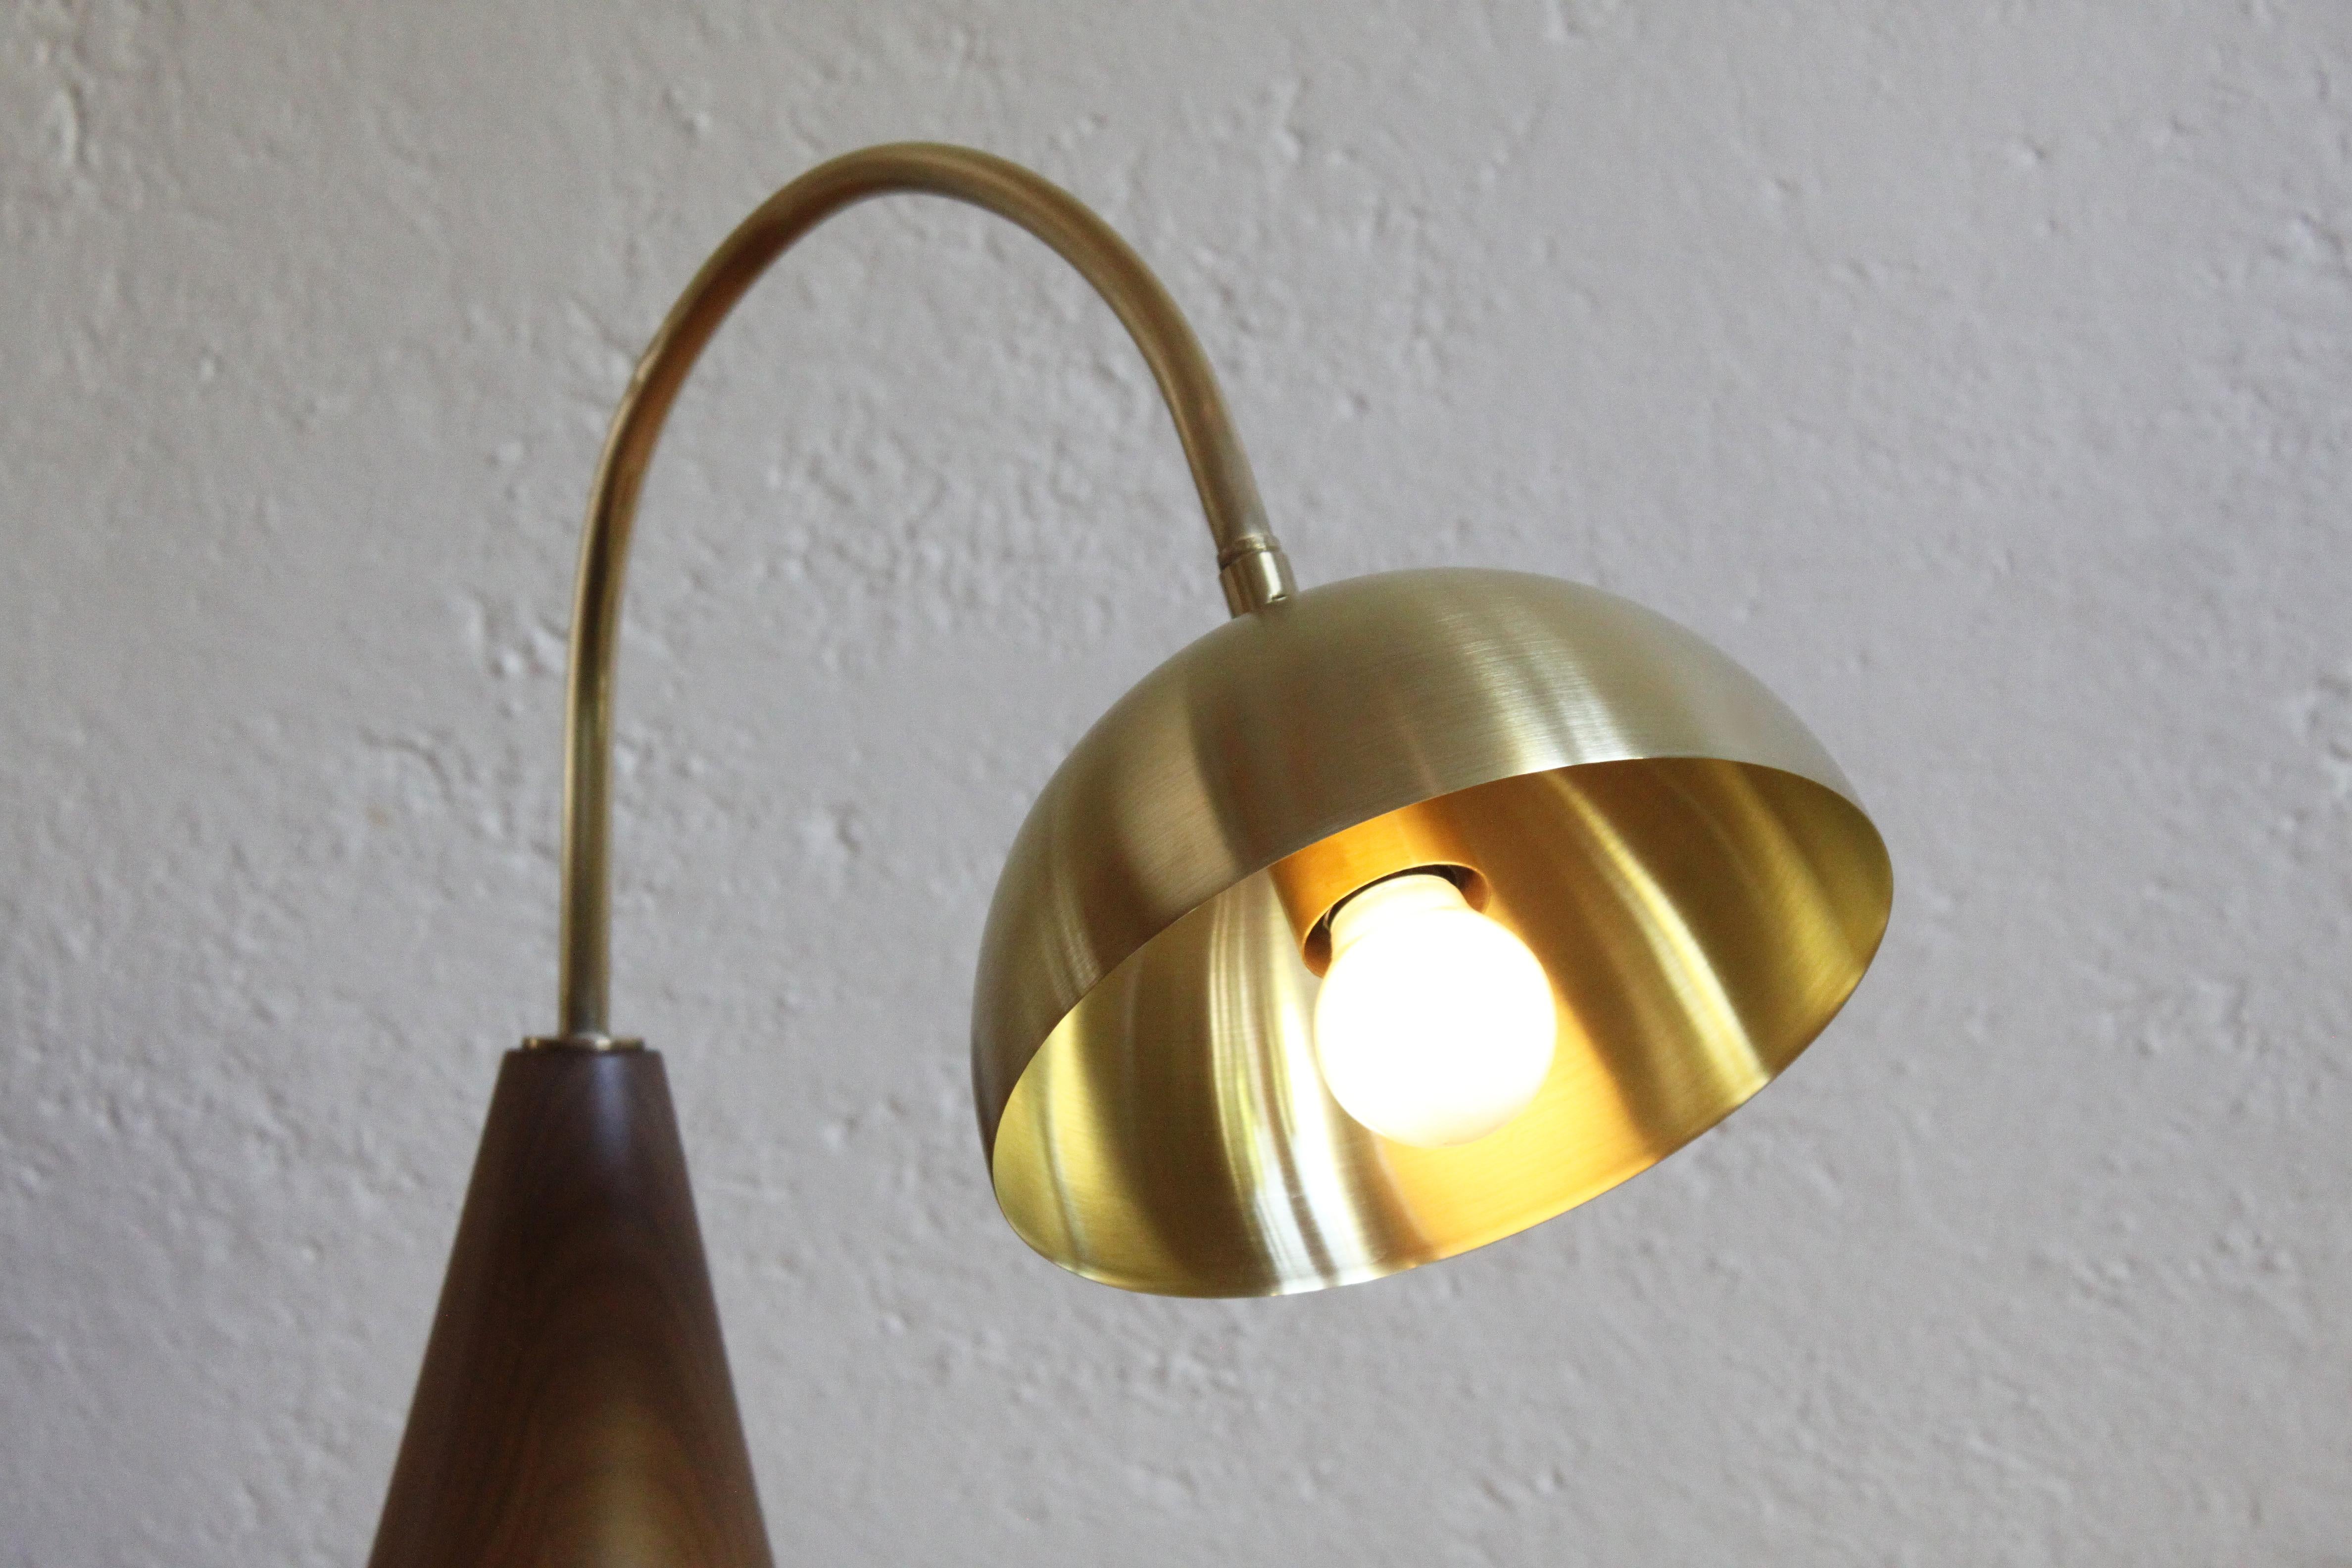 Steel Arco De Mesa Table Lamp by Maria Beckmann, Represented by Tuleste Factory For Sale